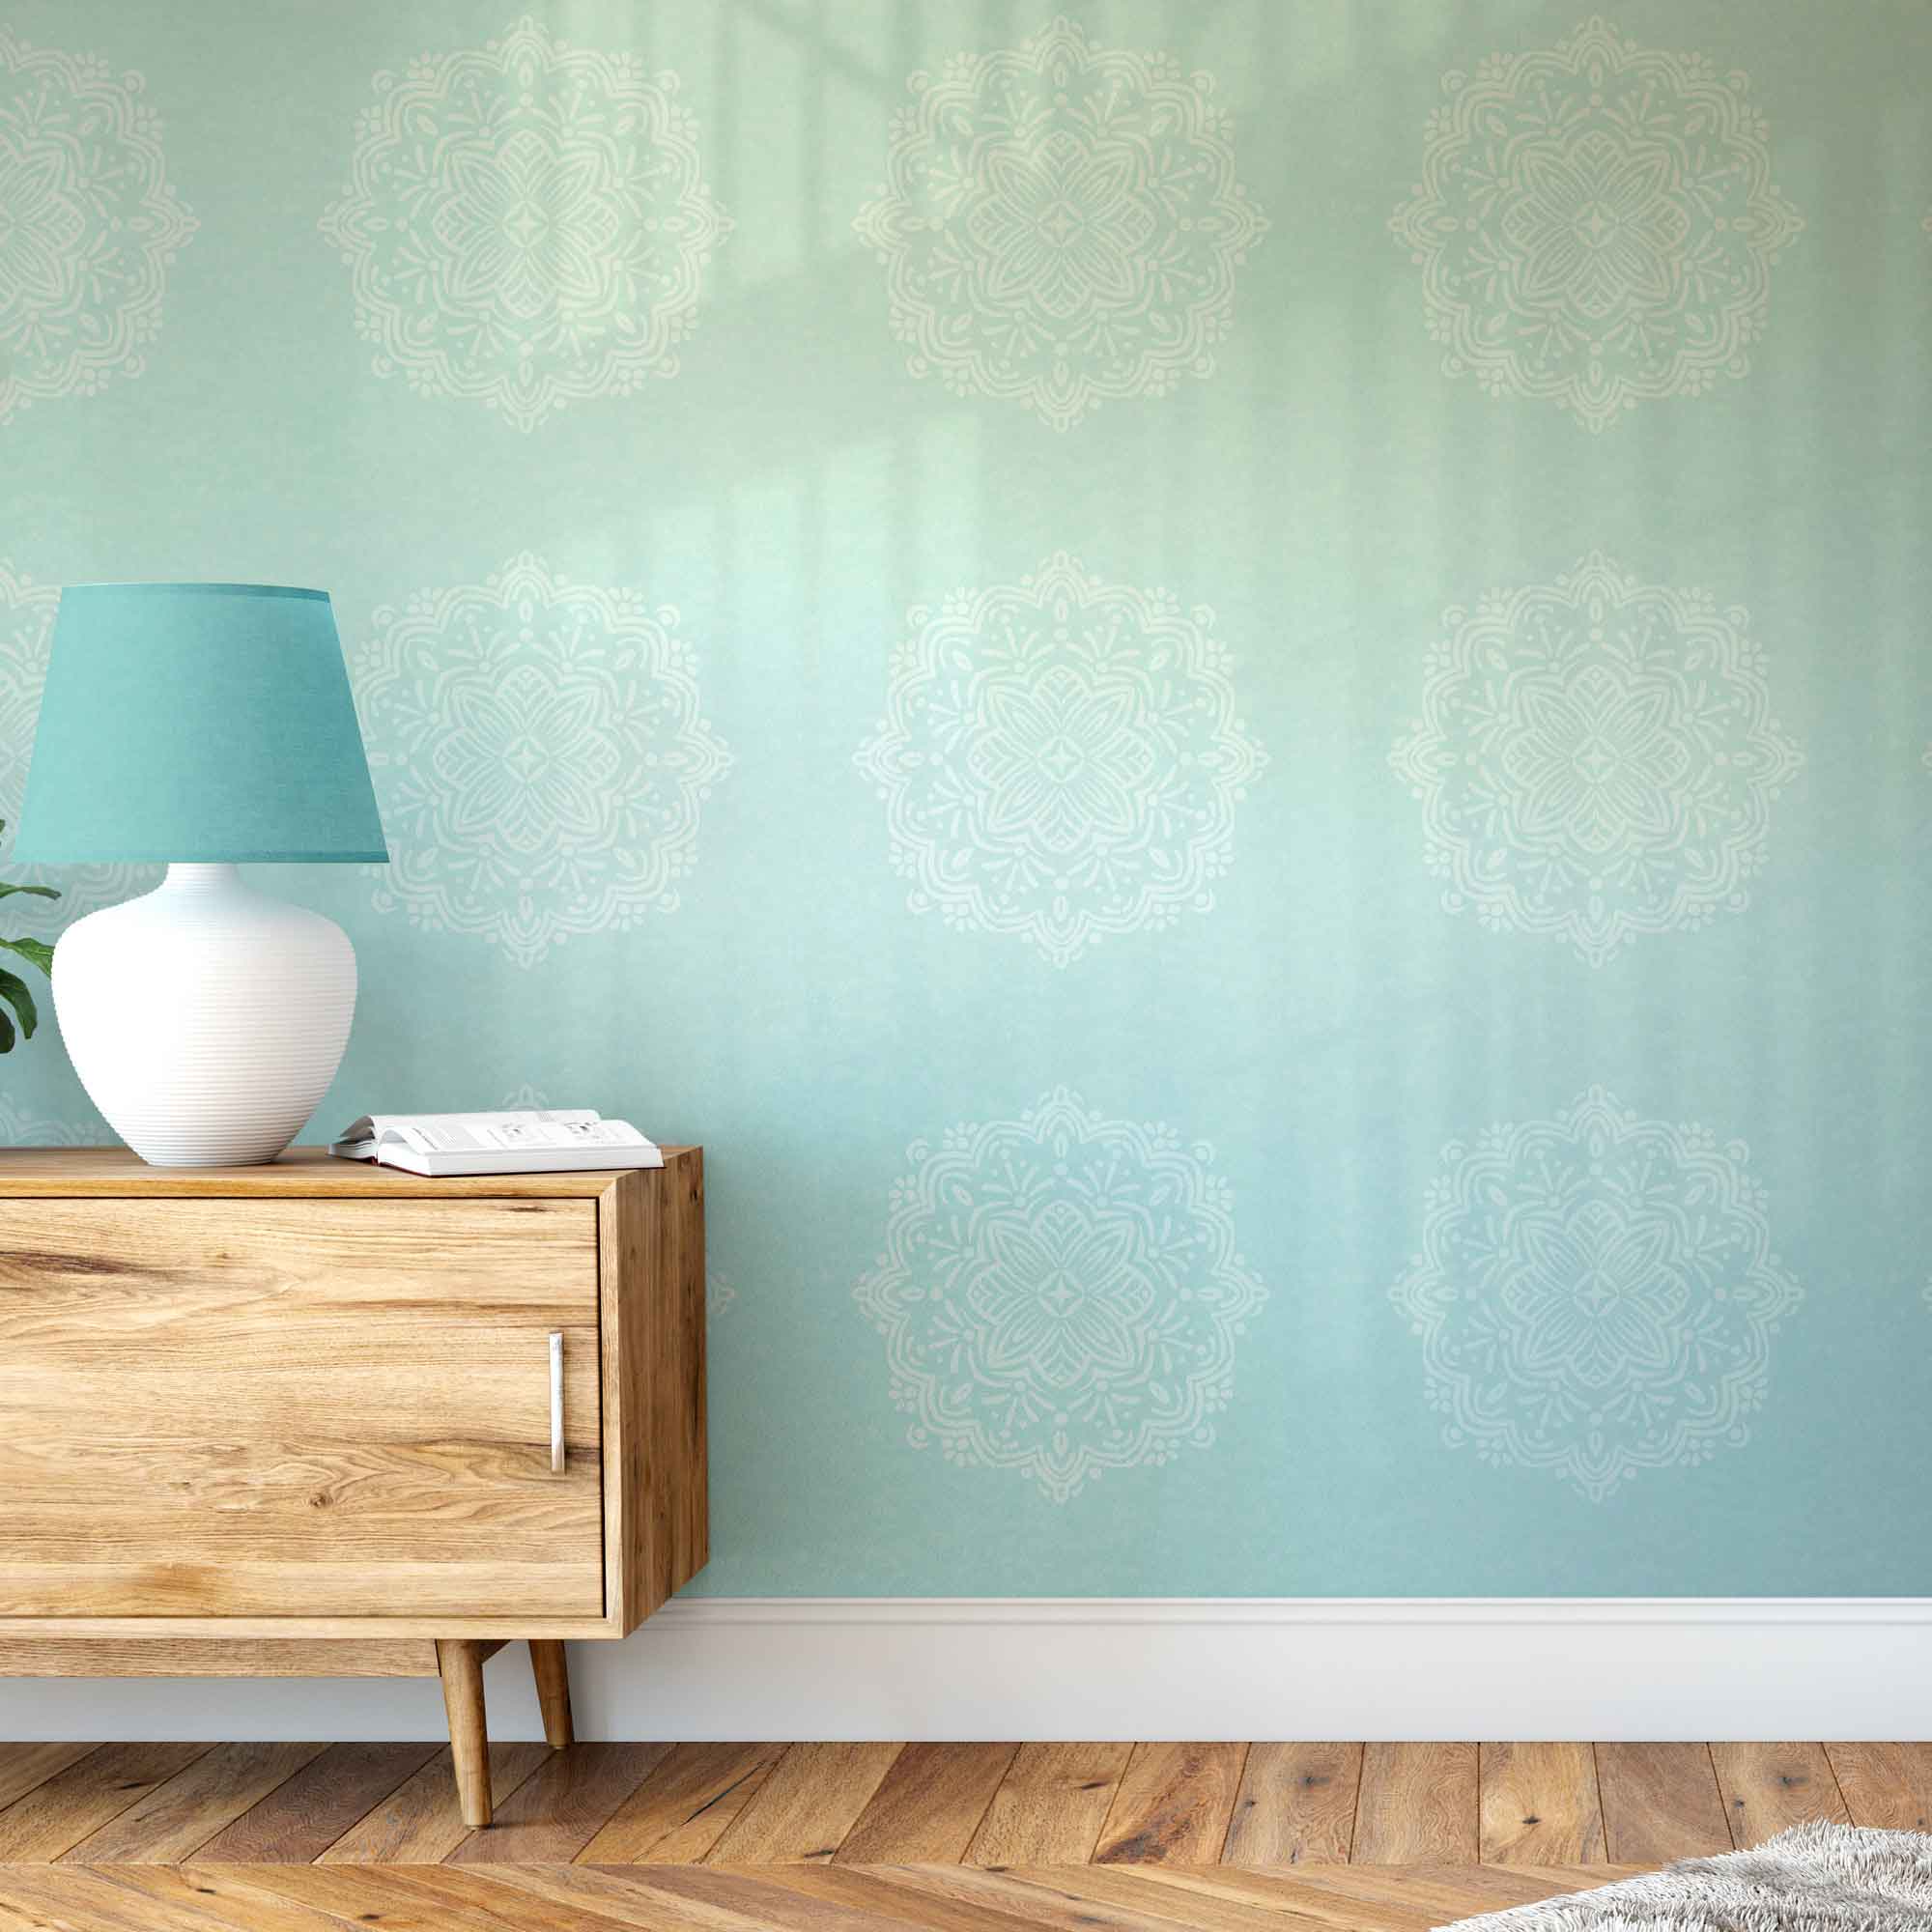 Simple Hand-Drawn Boho Mandalas on Aqua Background Removable Peel & Stick and Pre-Pasted Wallpaper - XL Size - Living Room Example